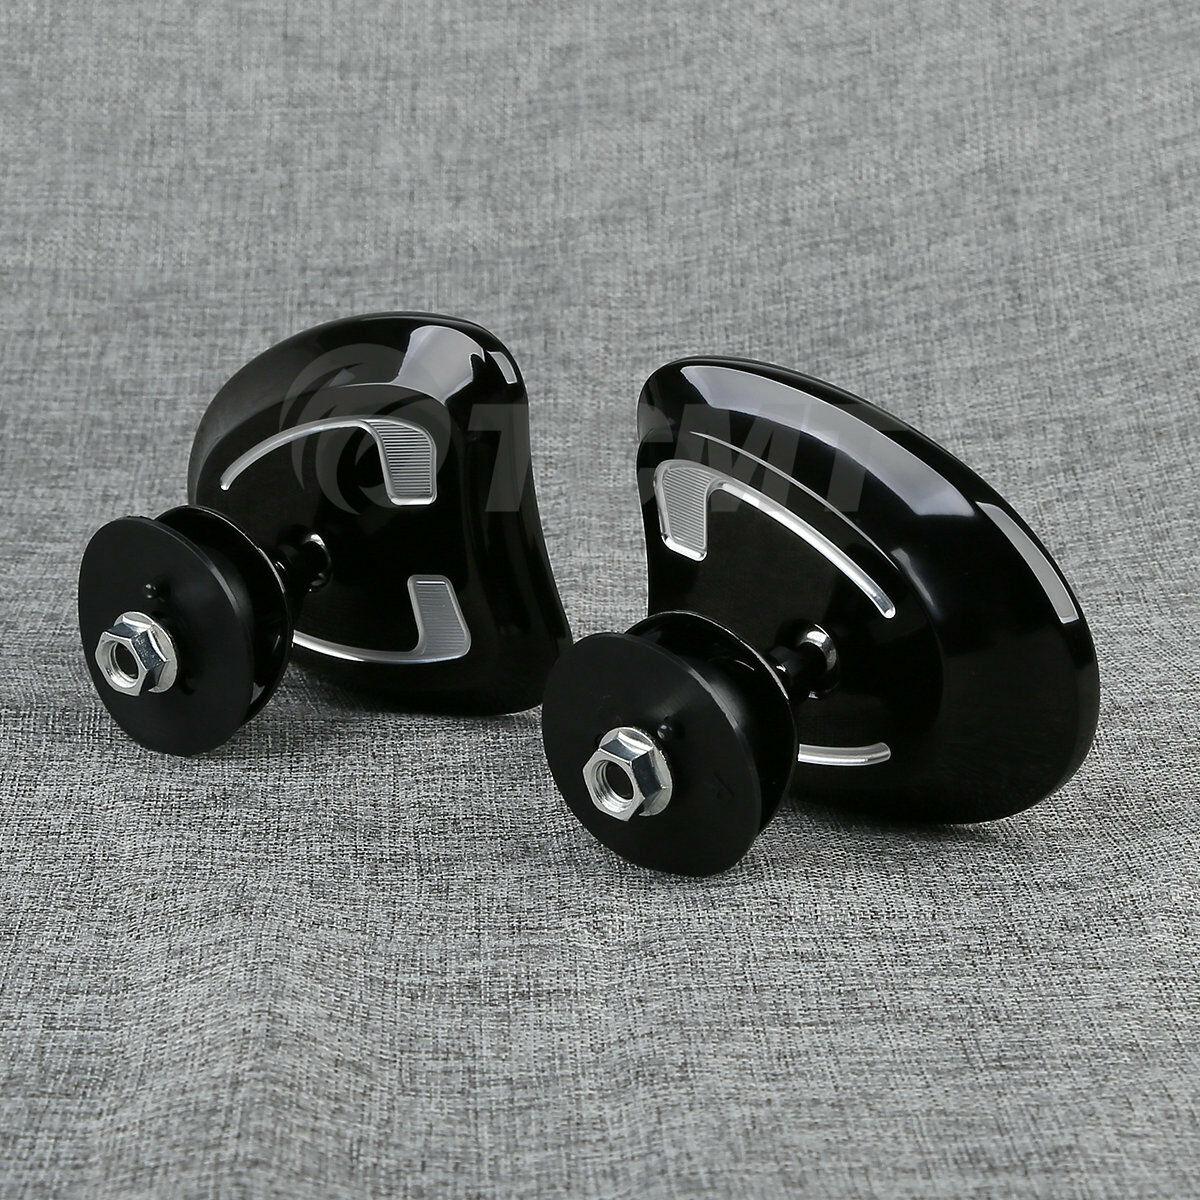 New Black Tapered Fairing Mount Mirrors For Harley Touring FLHT FLHX 2014-2022 - Moto Life Products